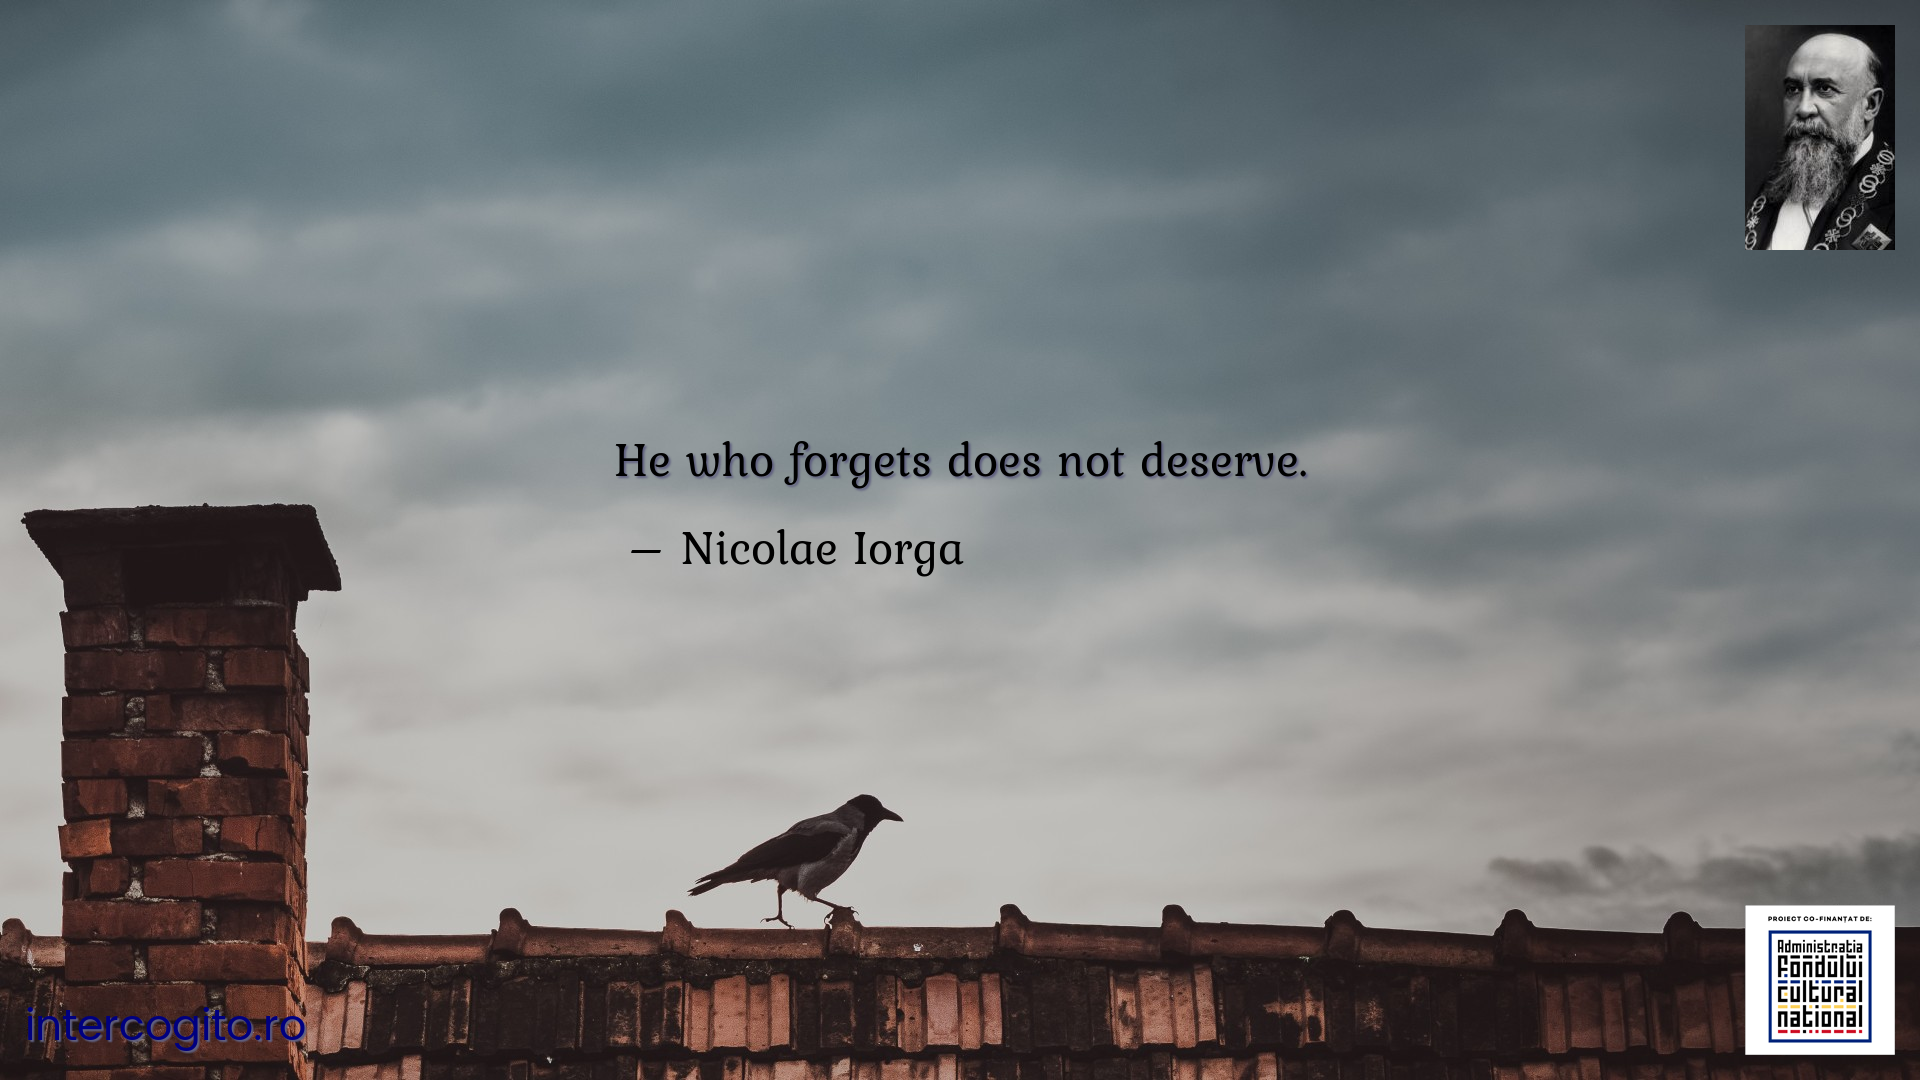 He who forgets does not deserve.